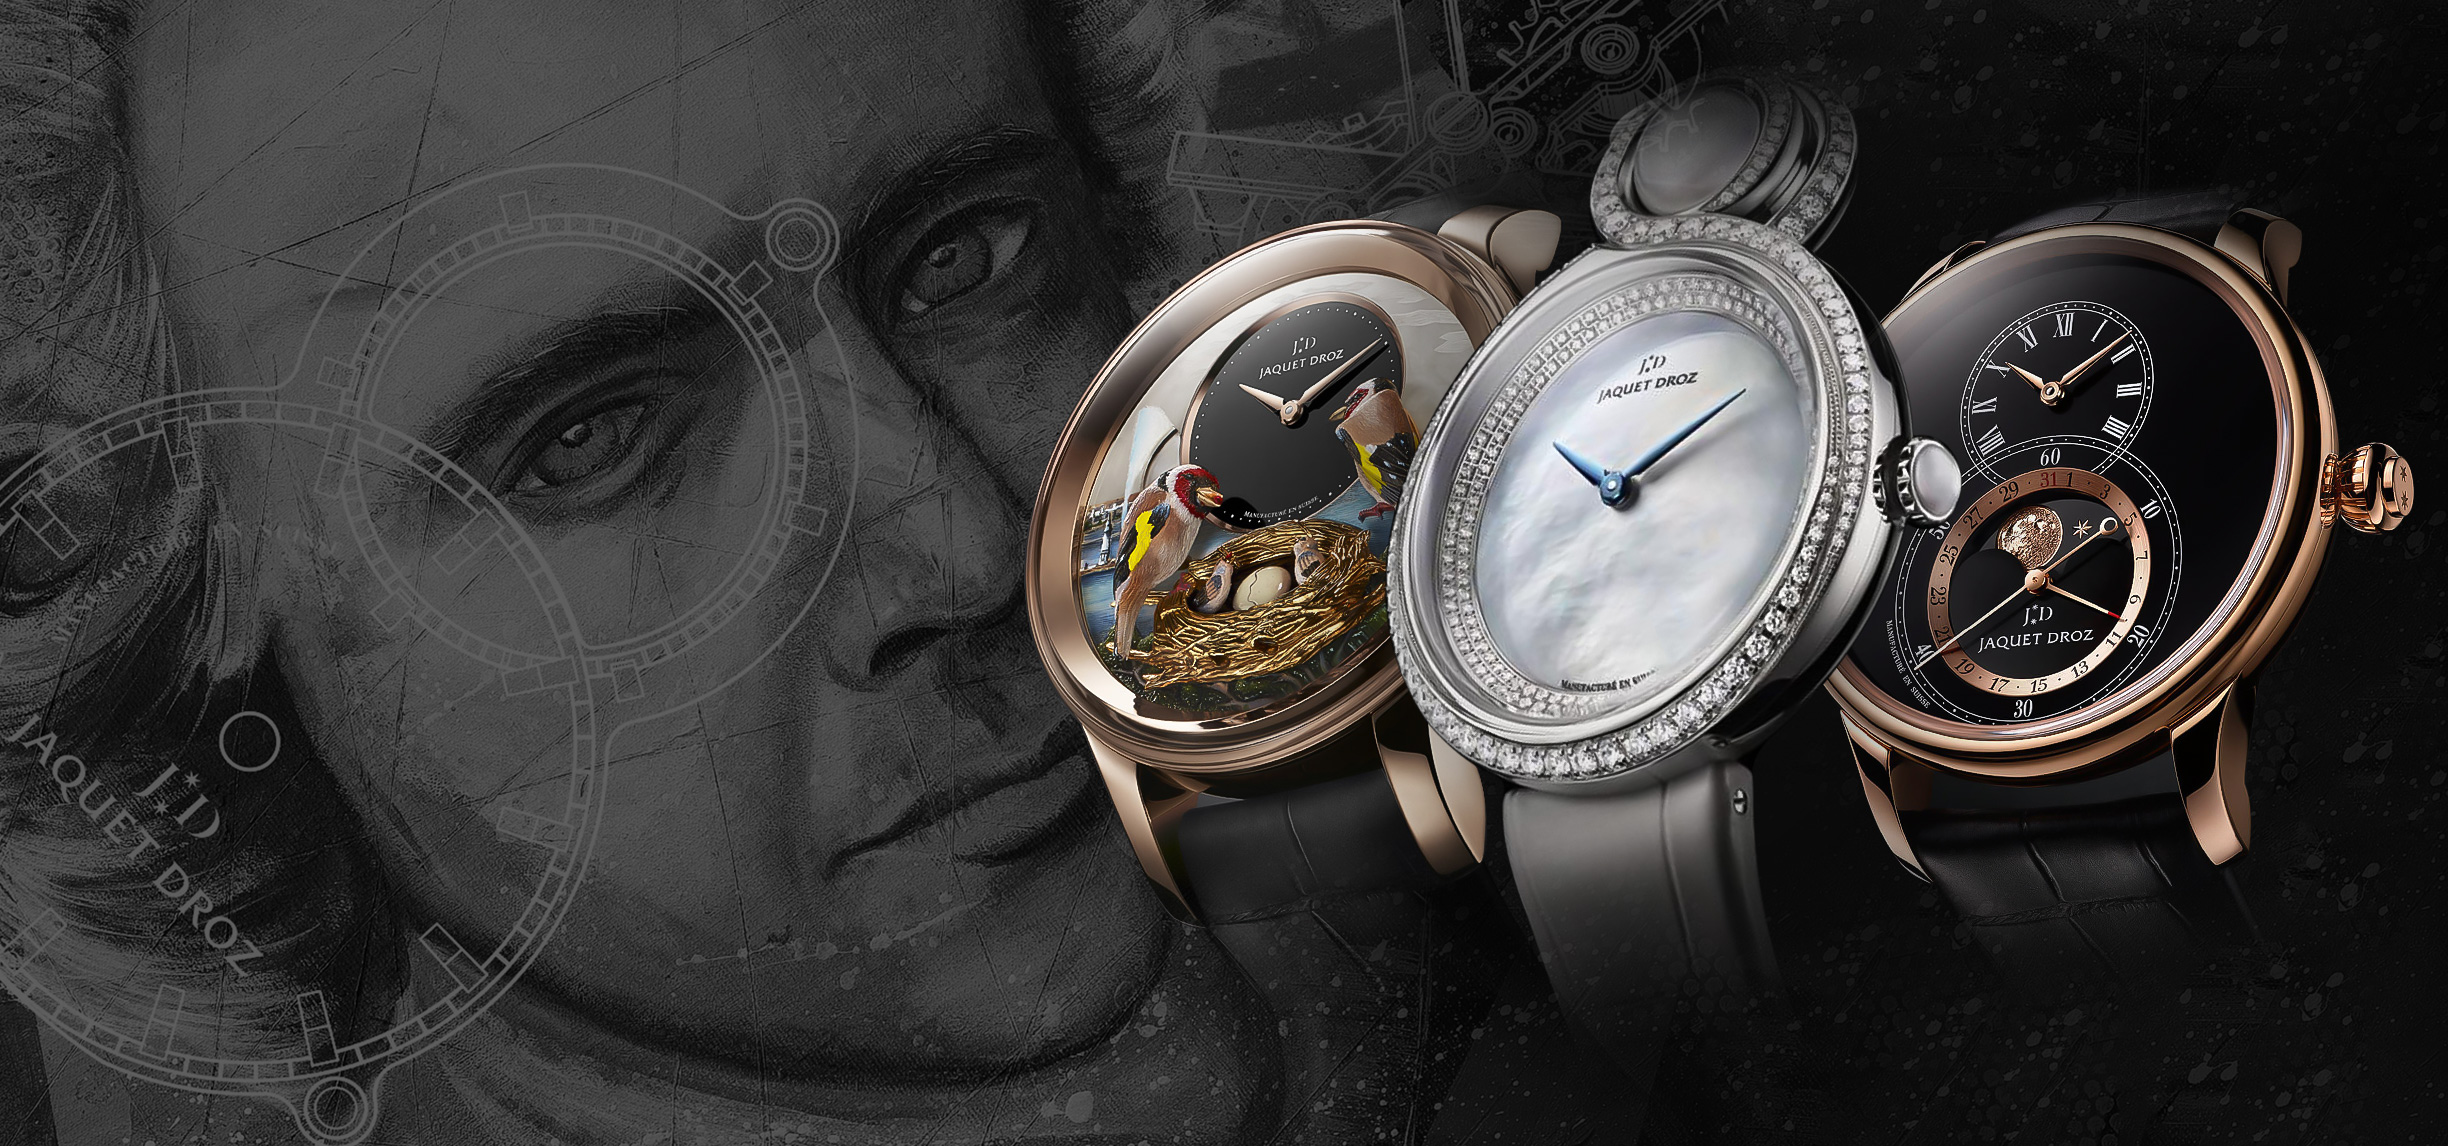 Jaquet Droz: Enthralling Watch Lovers For Nearly Three Centuries